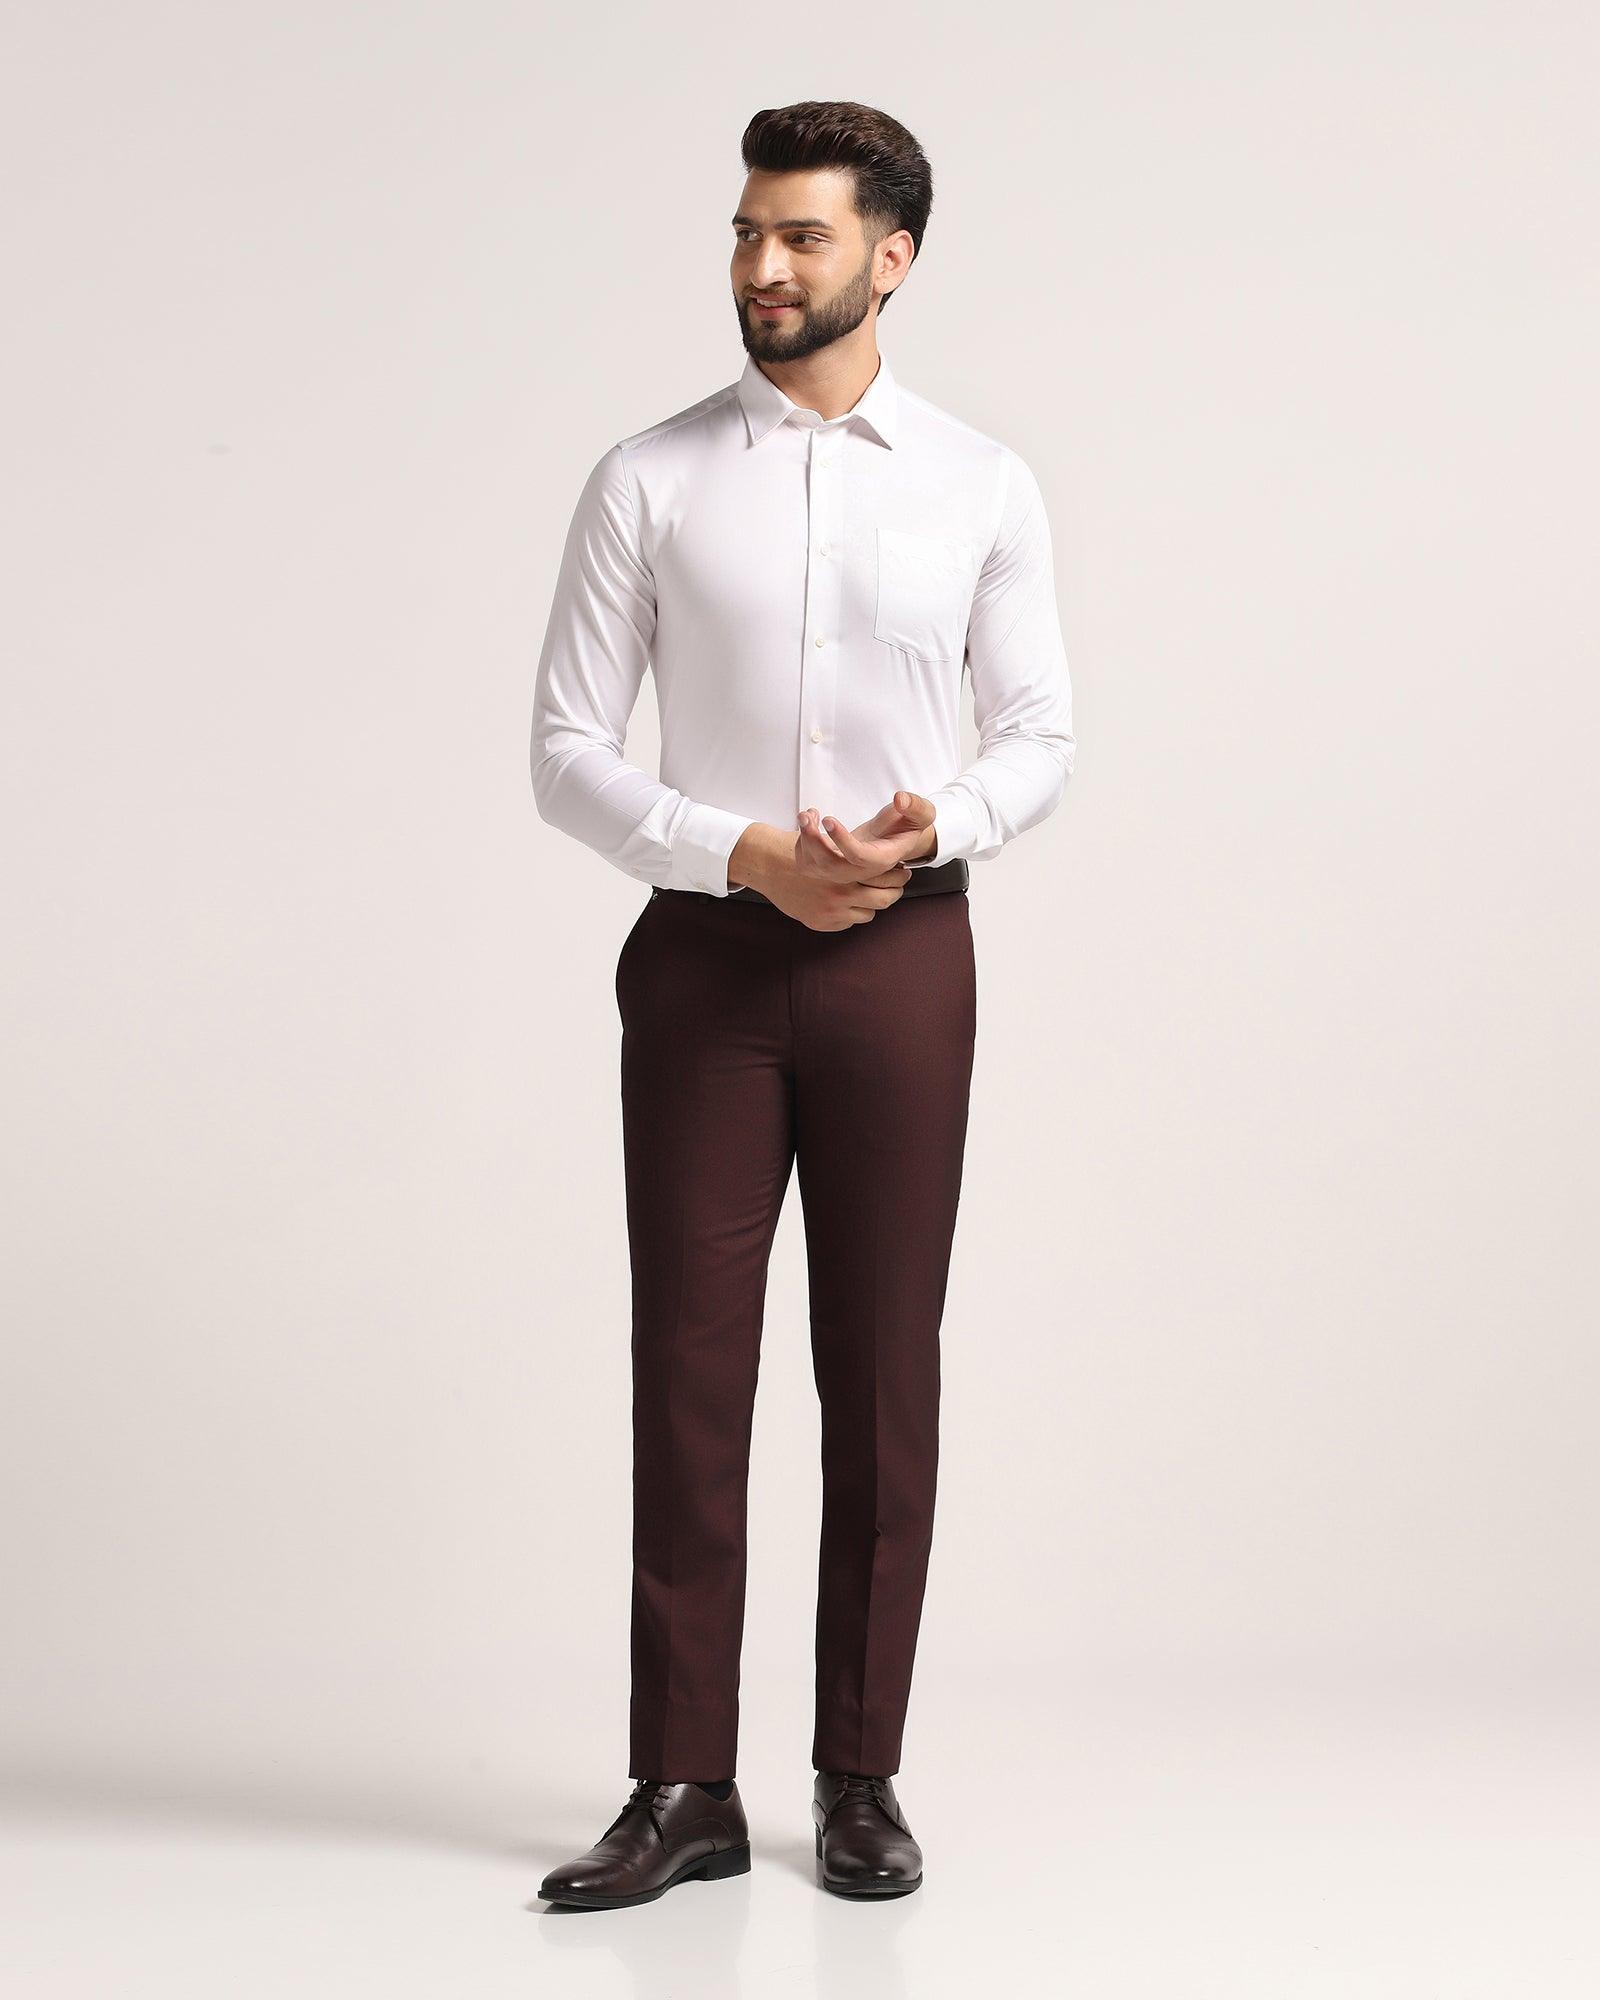 Buy GO-Gentlemen's Outfitters Men's Skinny Fit Burgundy Coloured Solid  Cotton Stretch Pants for Leisure Wear - 30/36 at Amazon.in